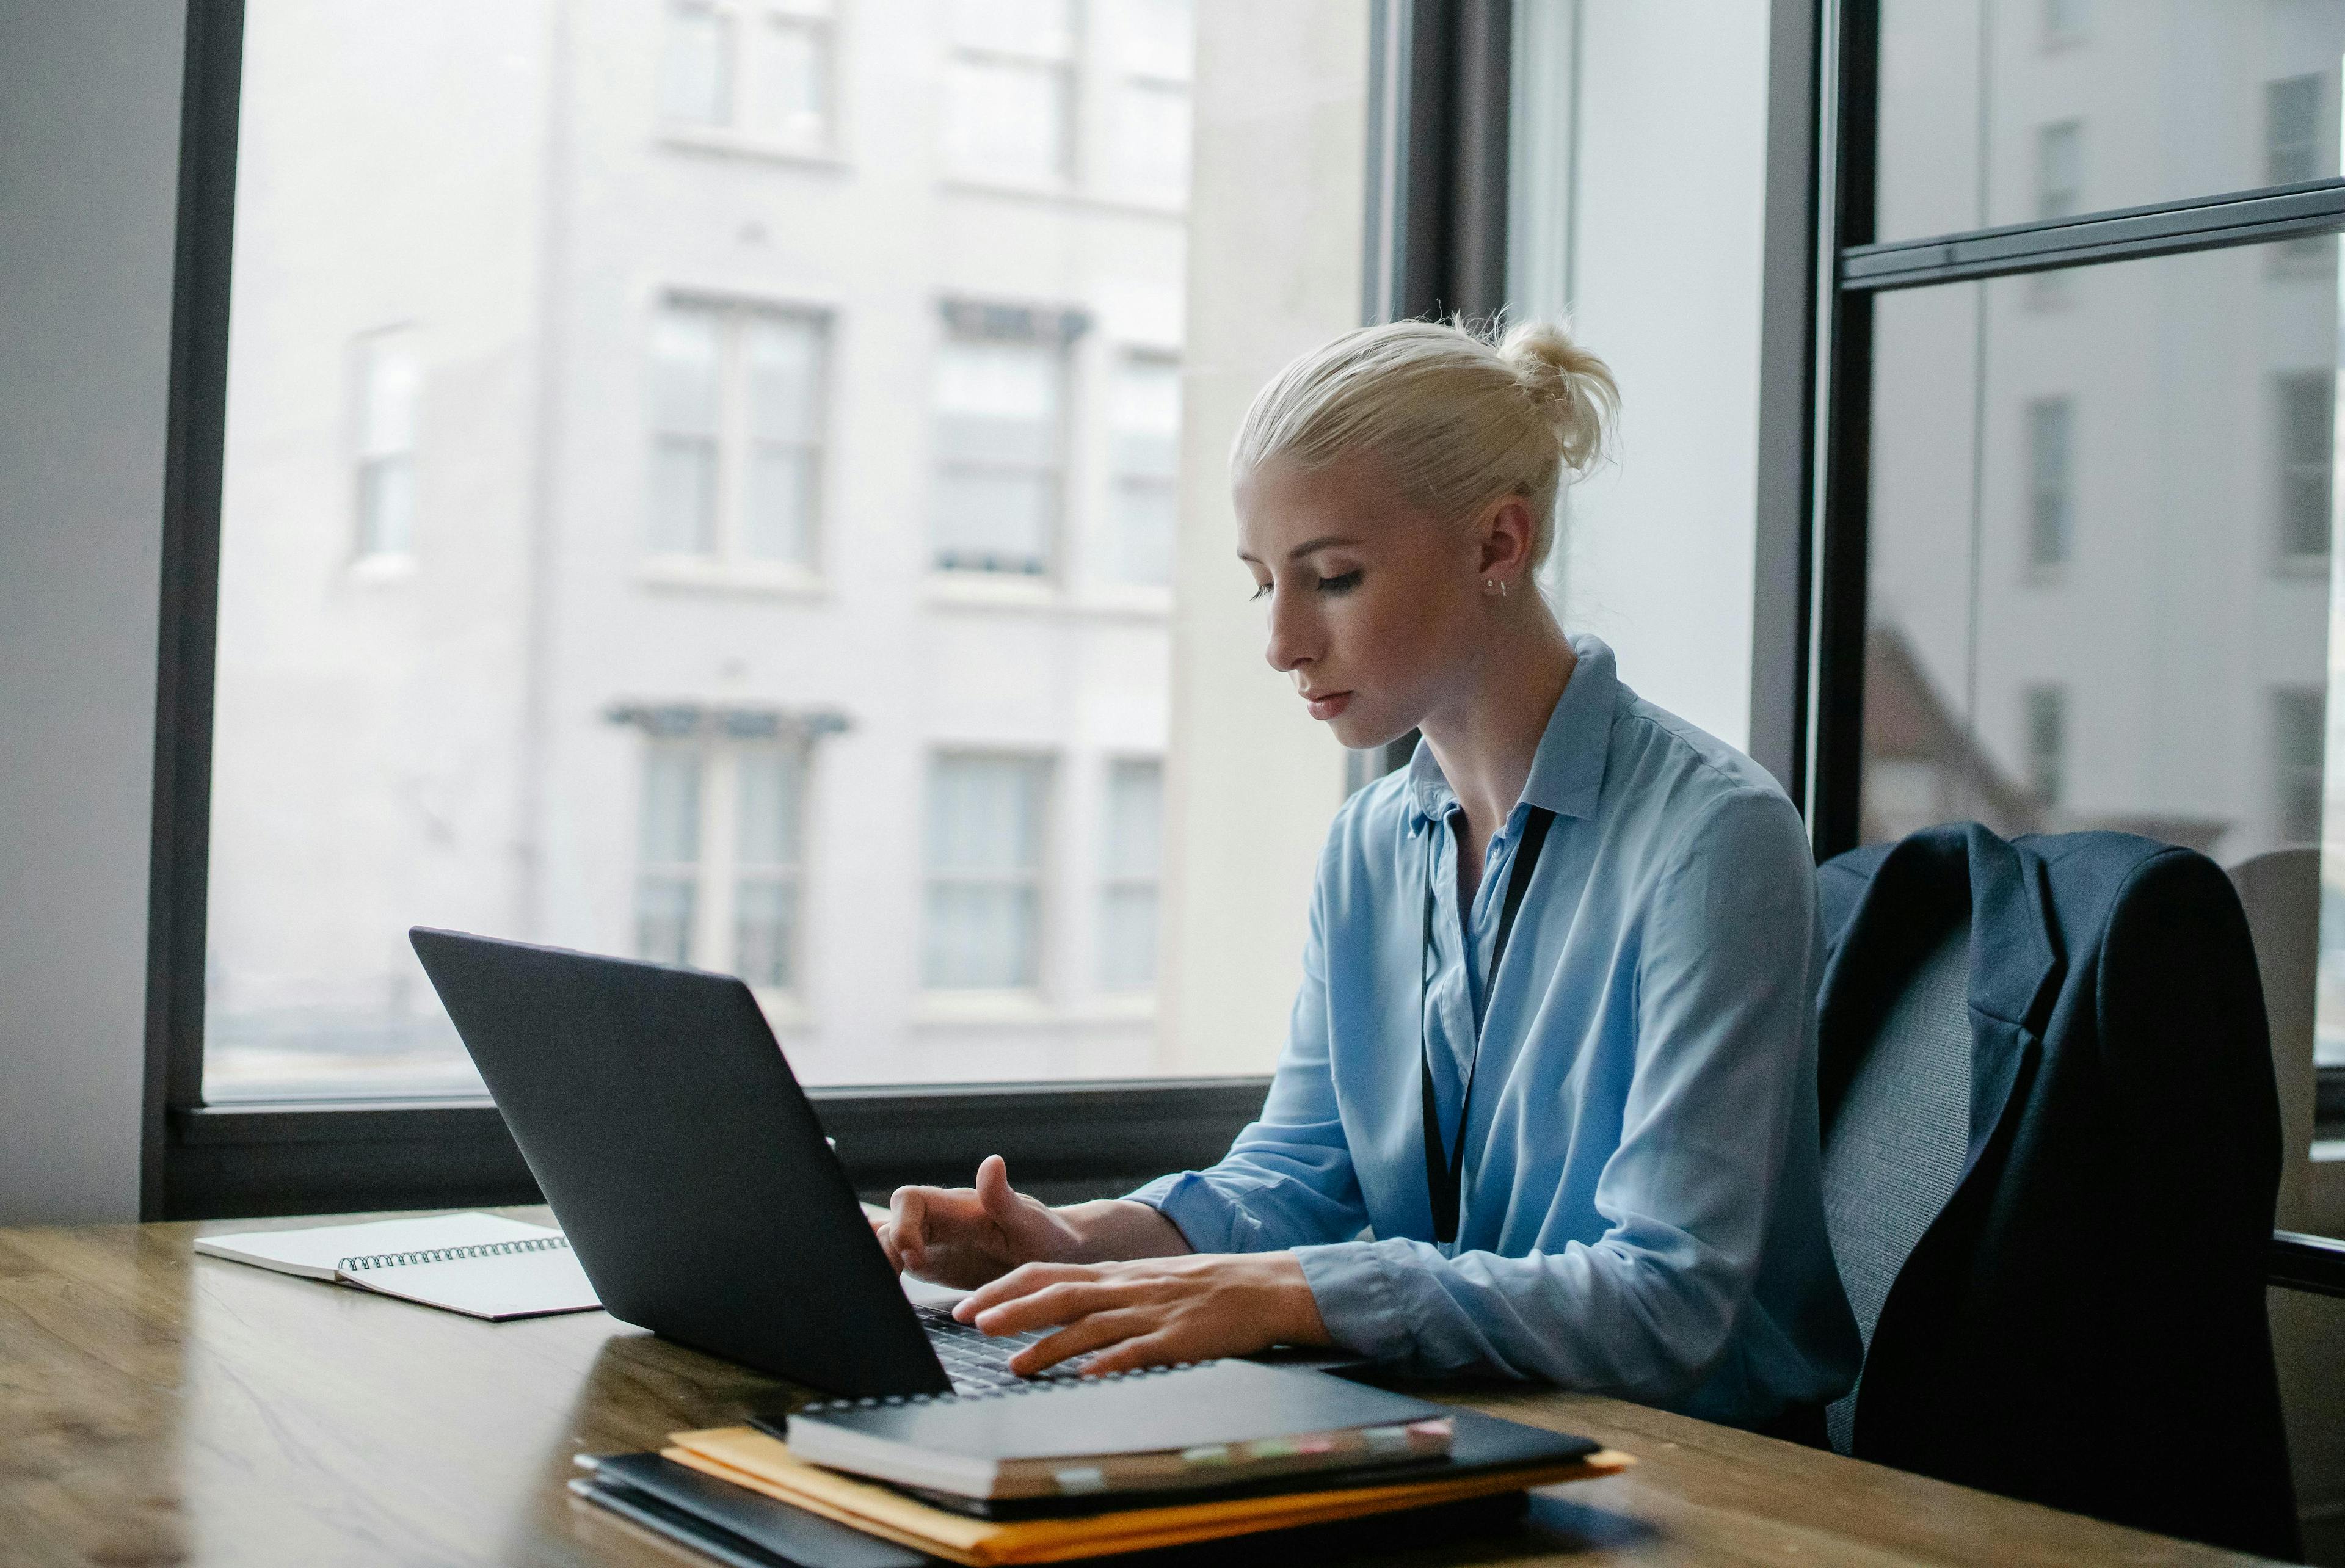 A focused businesswoman working on her laptop at a desk with a window view of city buildings, ideal for illustrating Shopify landing pages. The setting highlights professionalism and productivity, suitable for ecommerce and online business contexts.